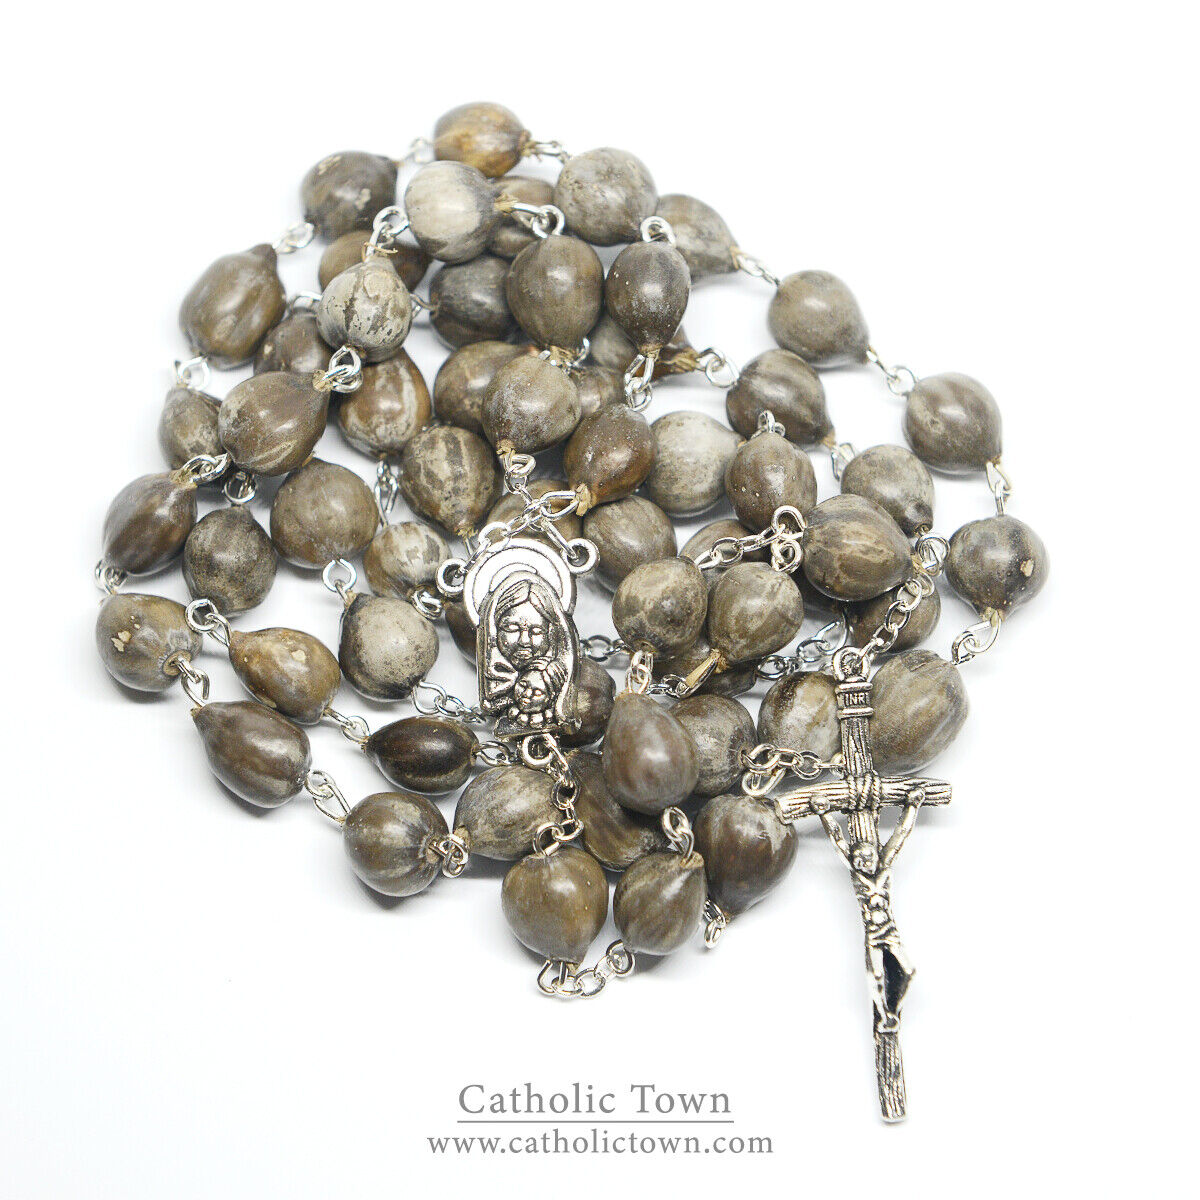 Catholic JOB\'S TEARS Seed Bead Rosary with Madonna and Child medal and Crucifix 